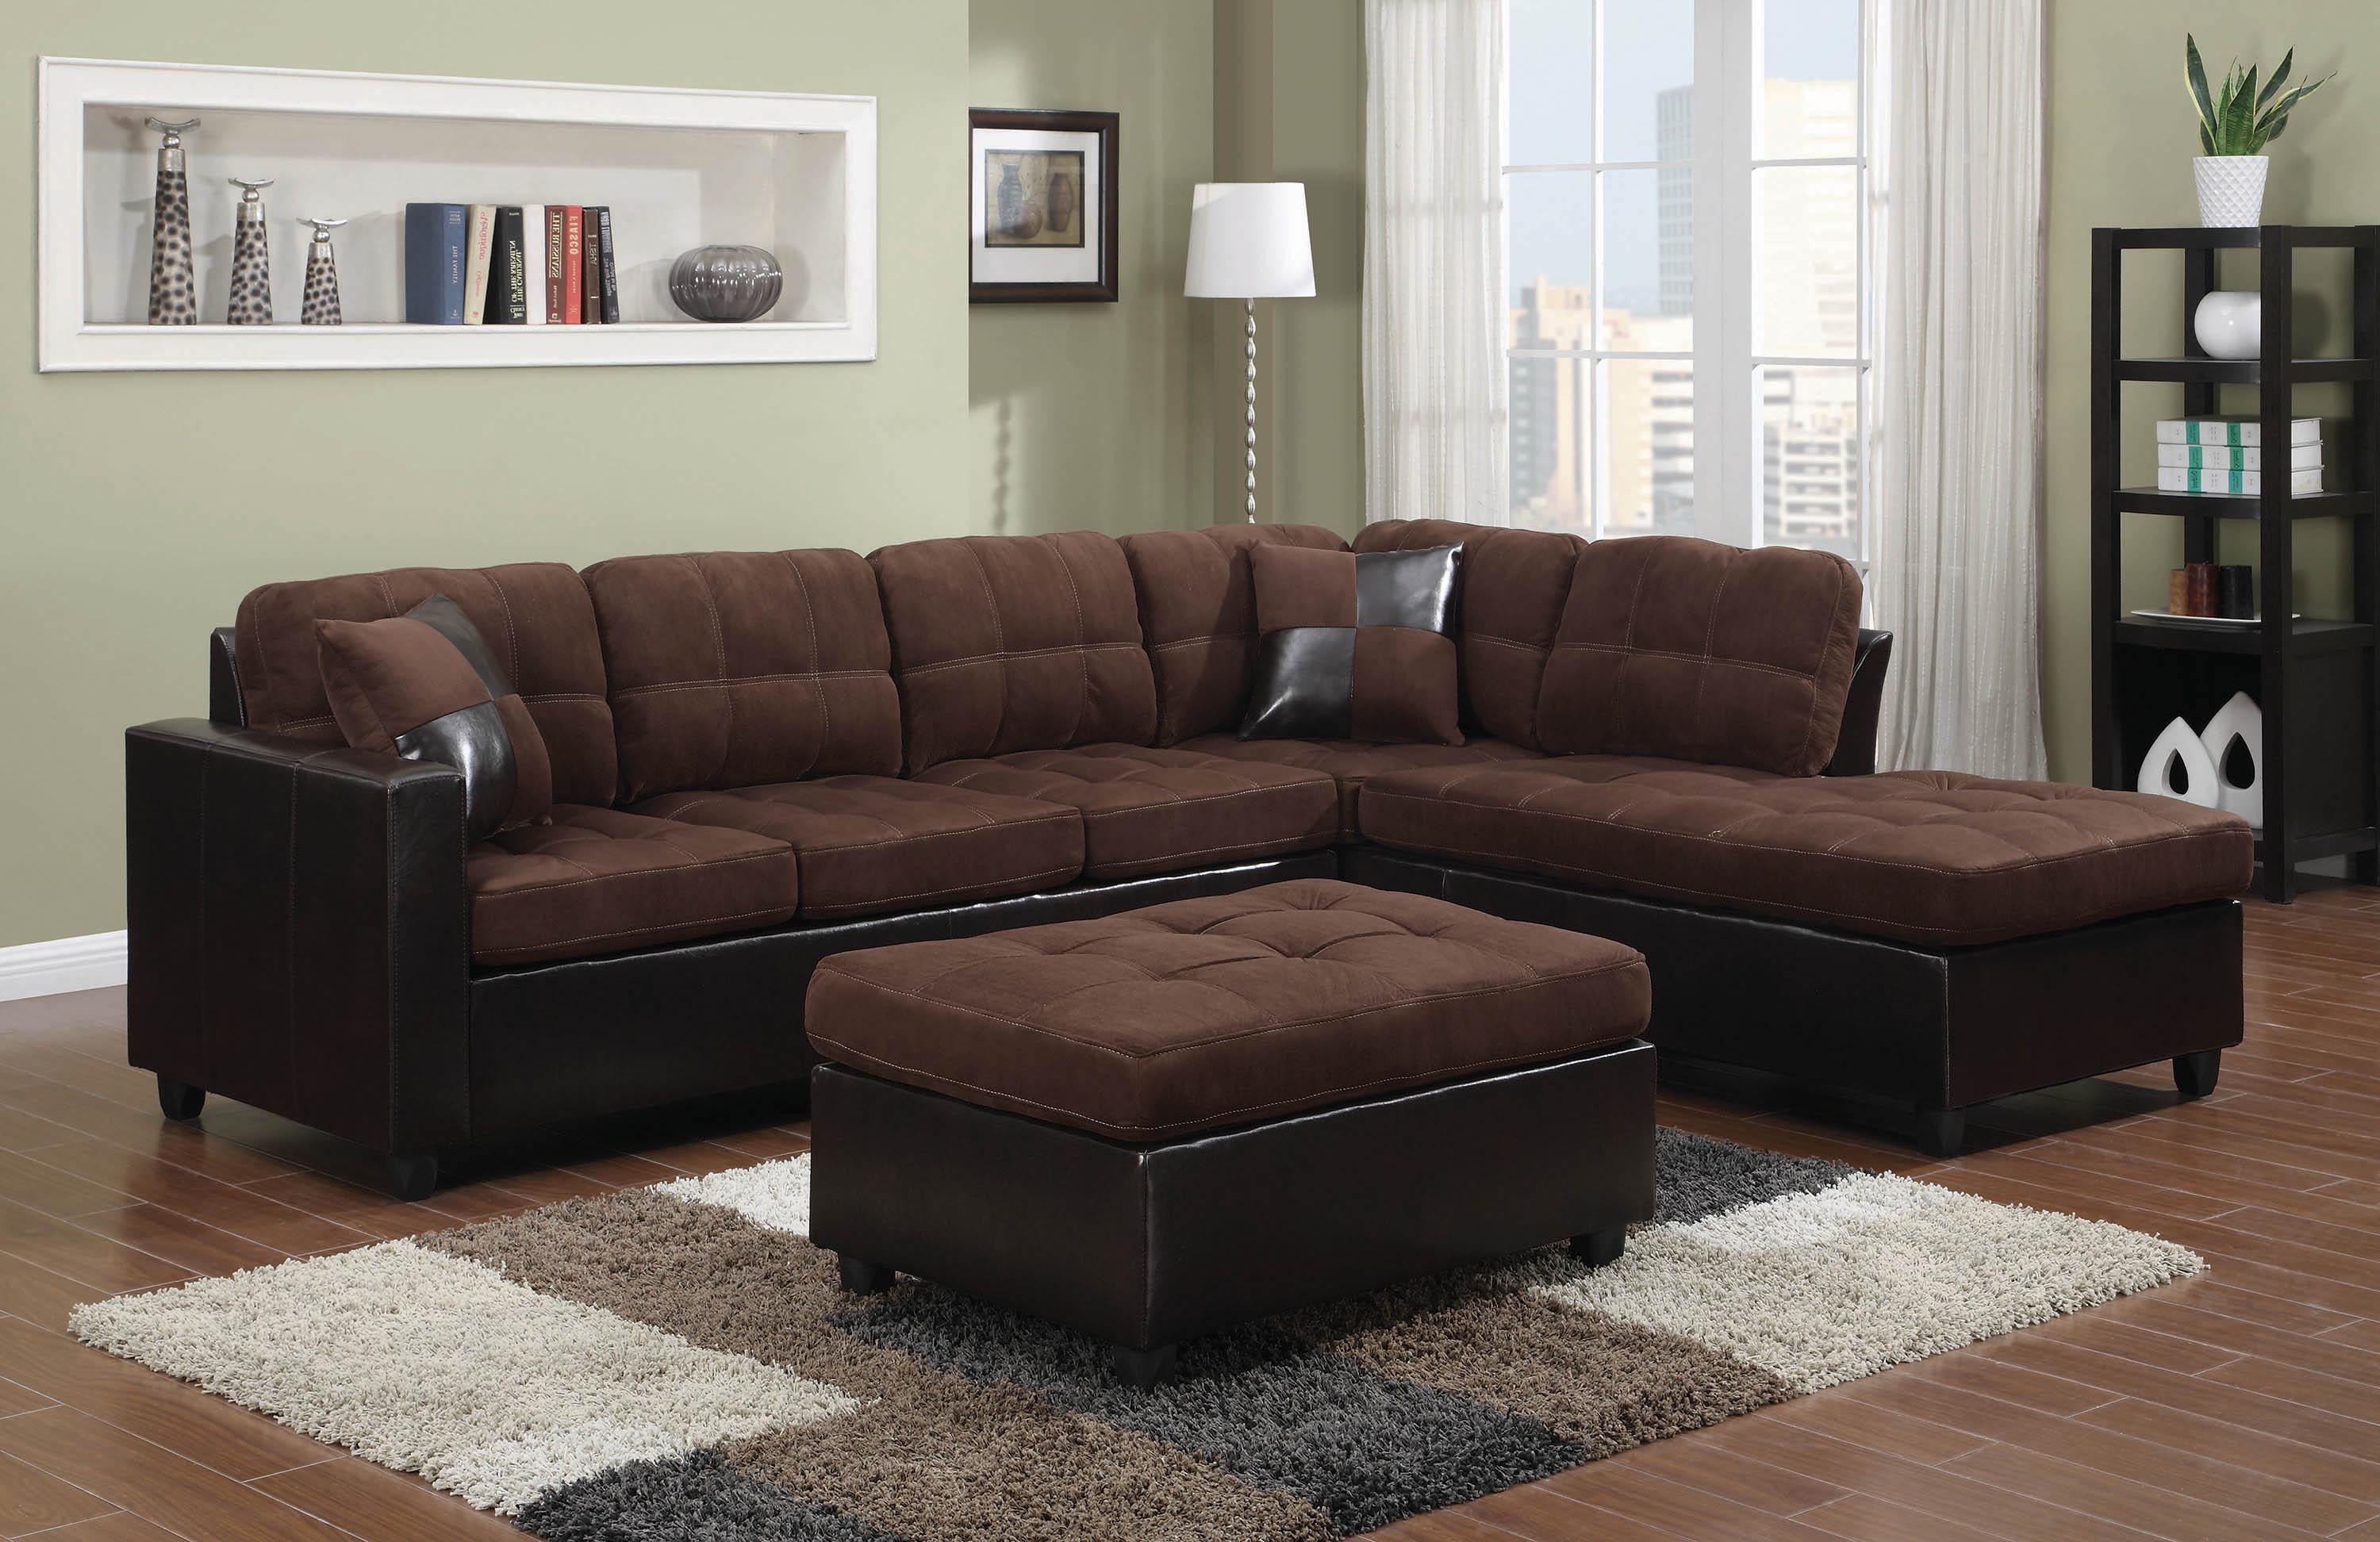 Contemporary Sectional Set 505655-2S Mallory 505655-2S in Chocolate Microfiber